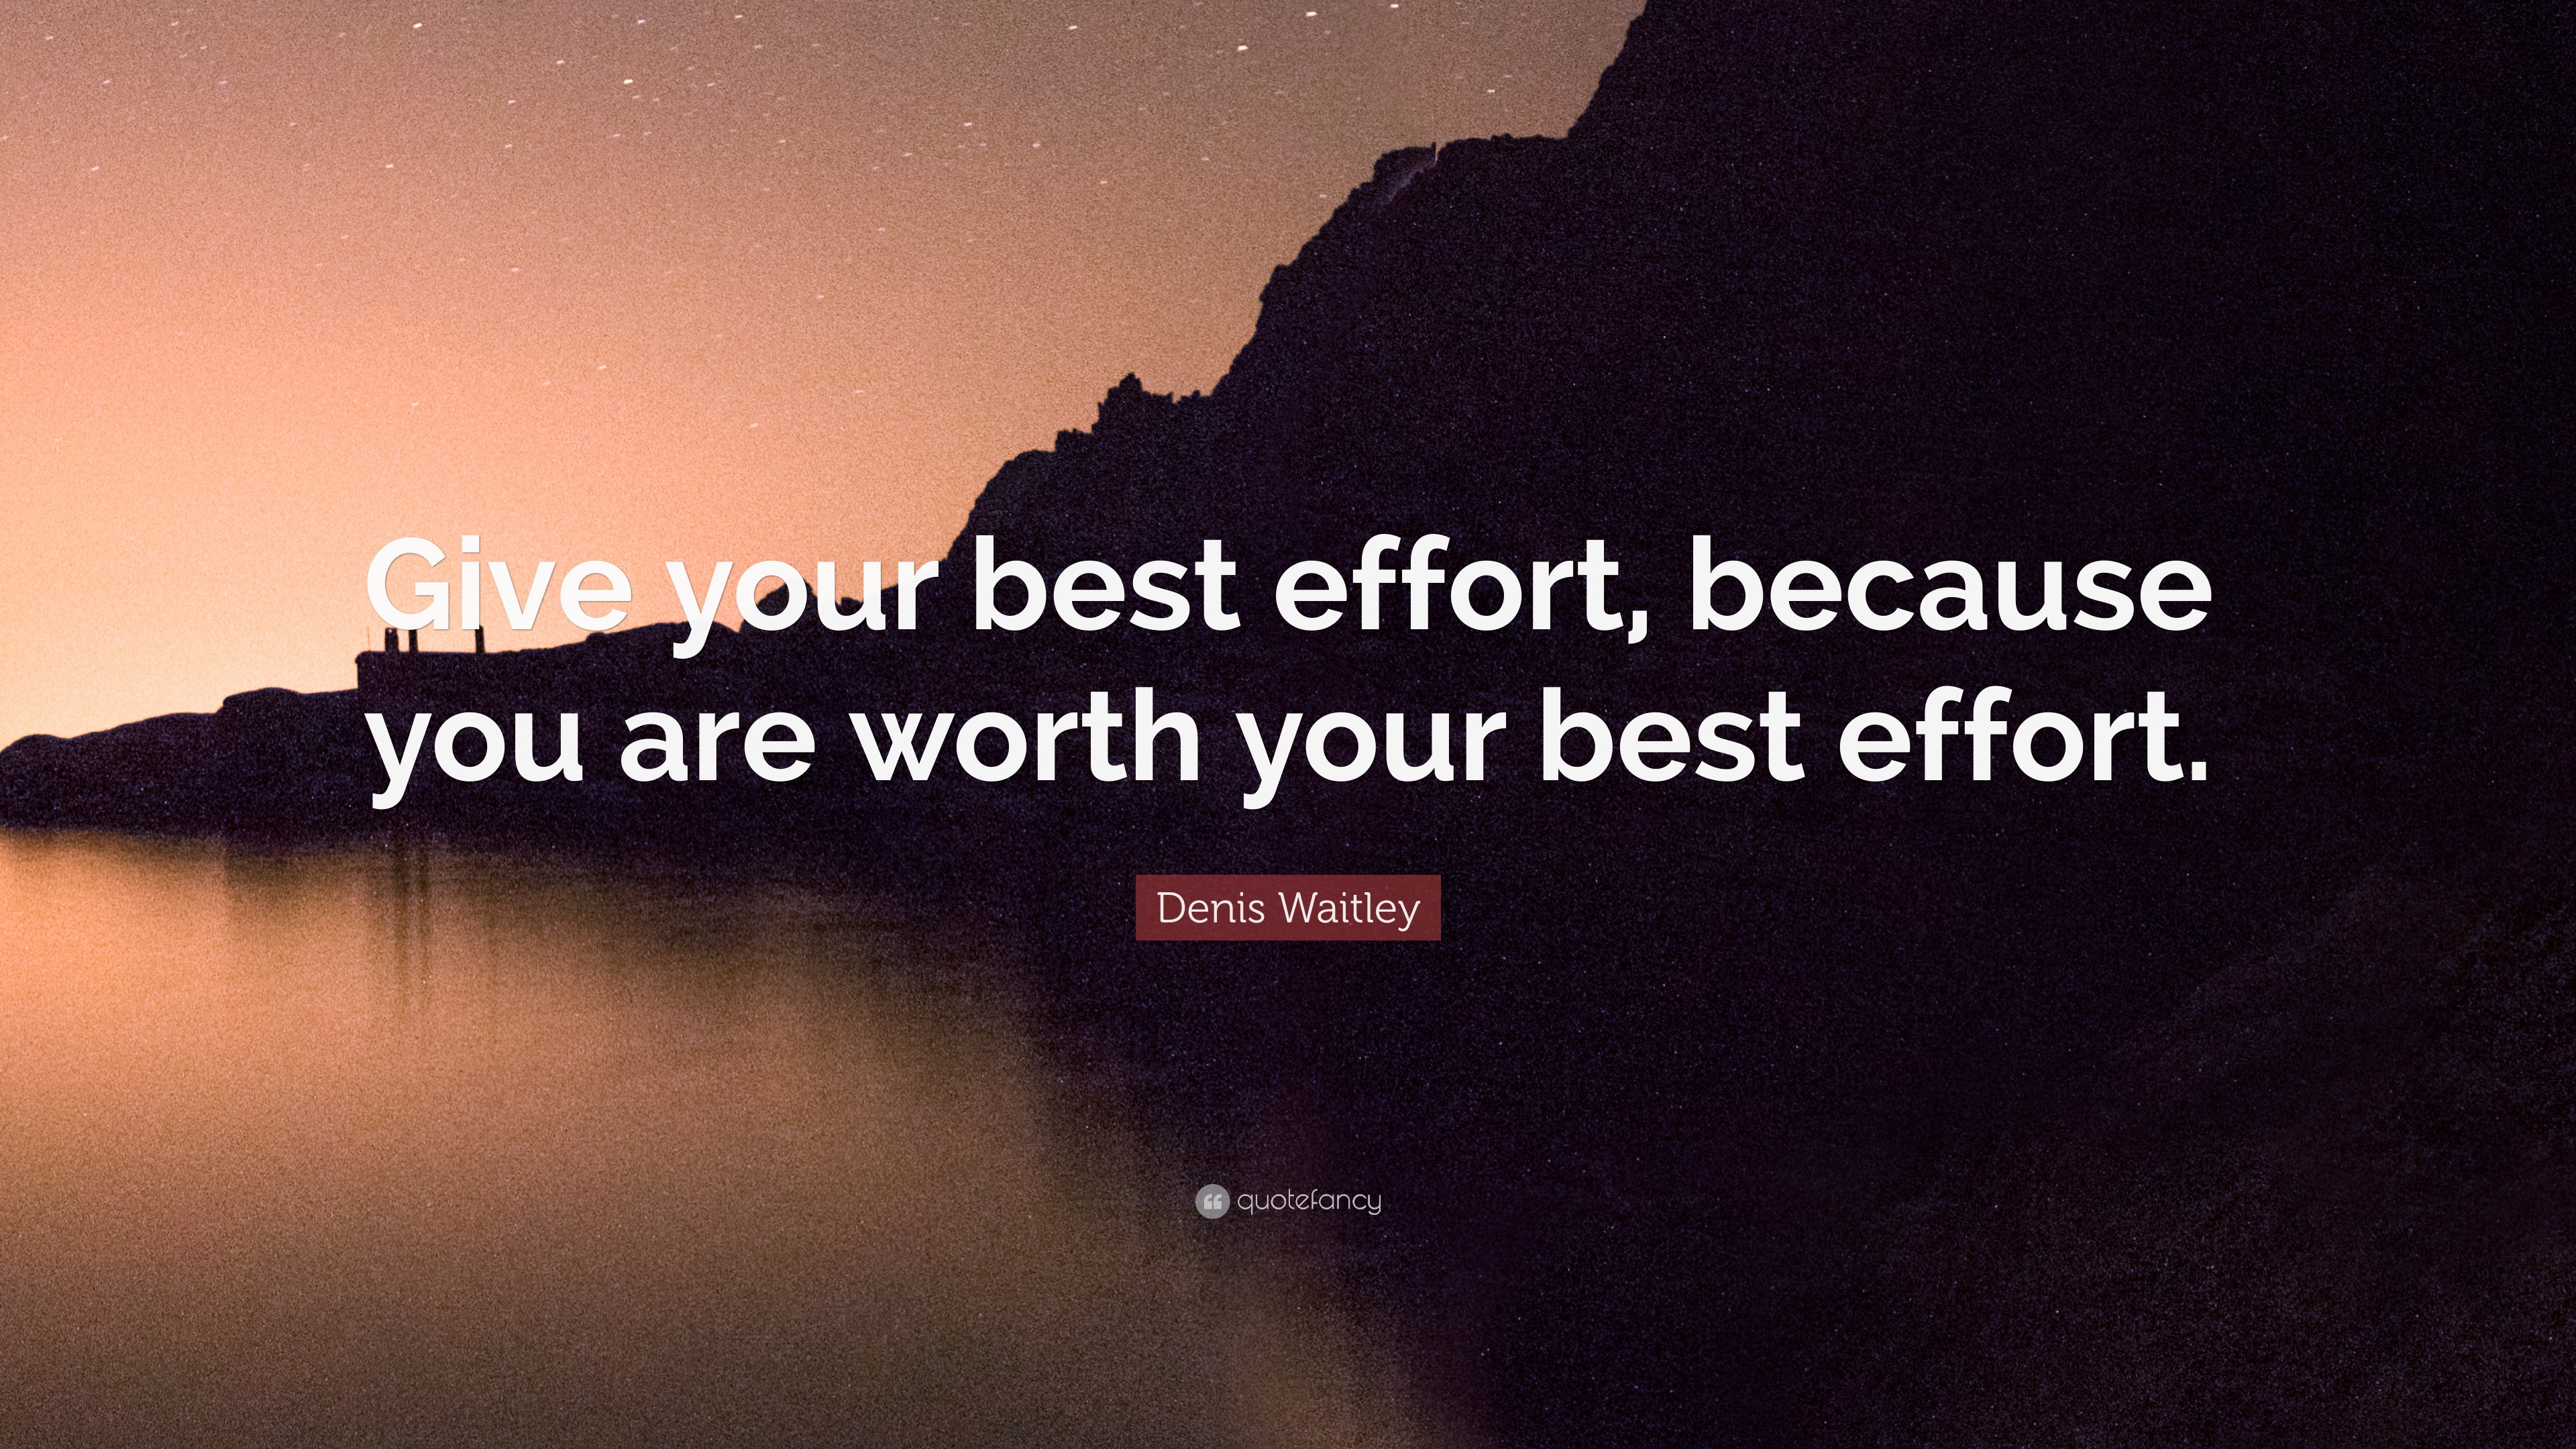 Denis Waitley Quote “Give your best effort, because you